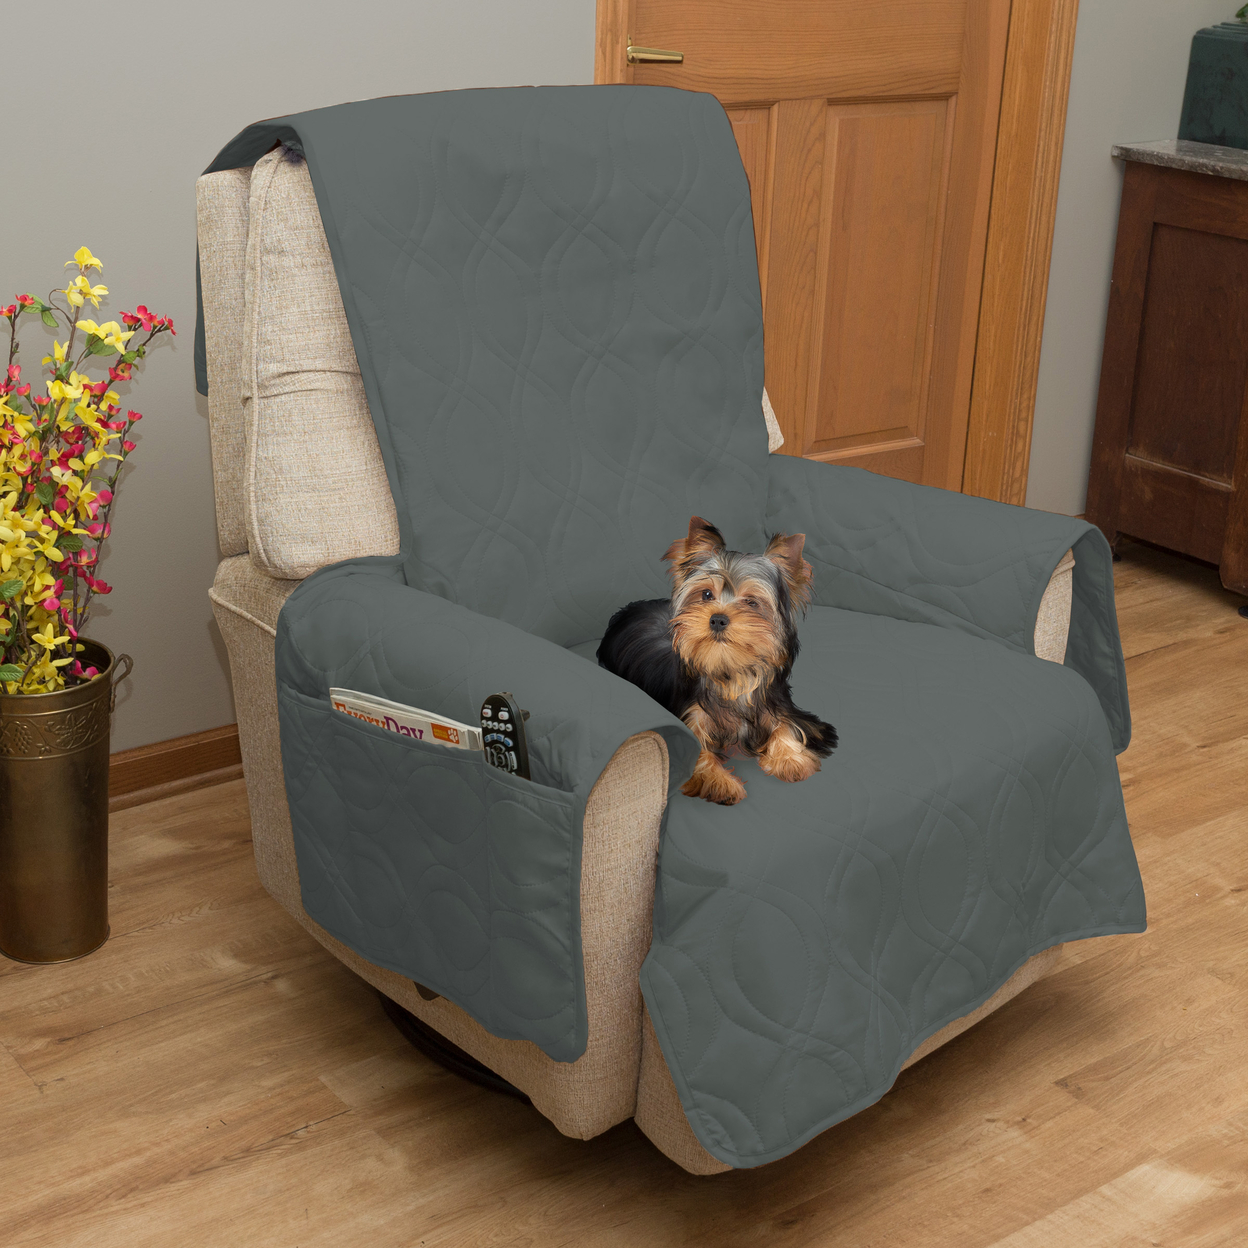 Furniture Cover Waterproof Chair Protector Kids Pets Dogs Cats Stain Resistant - Gray